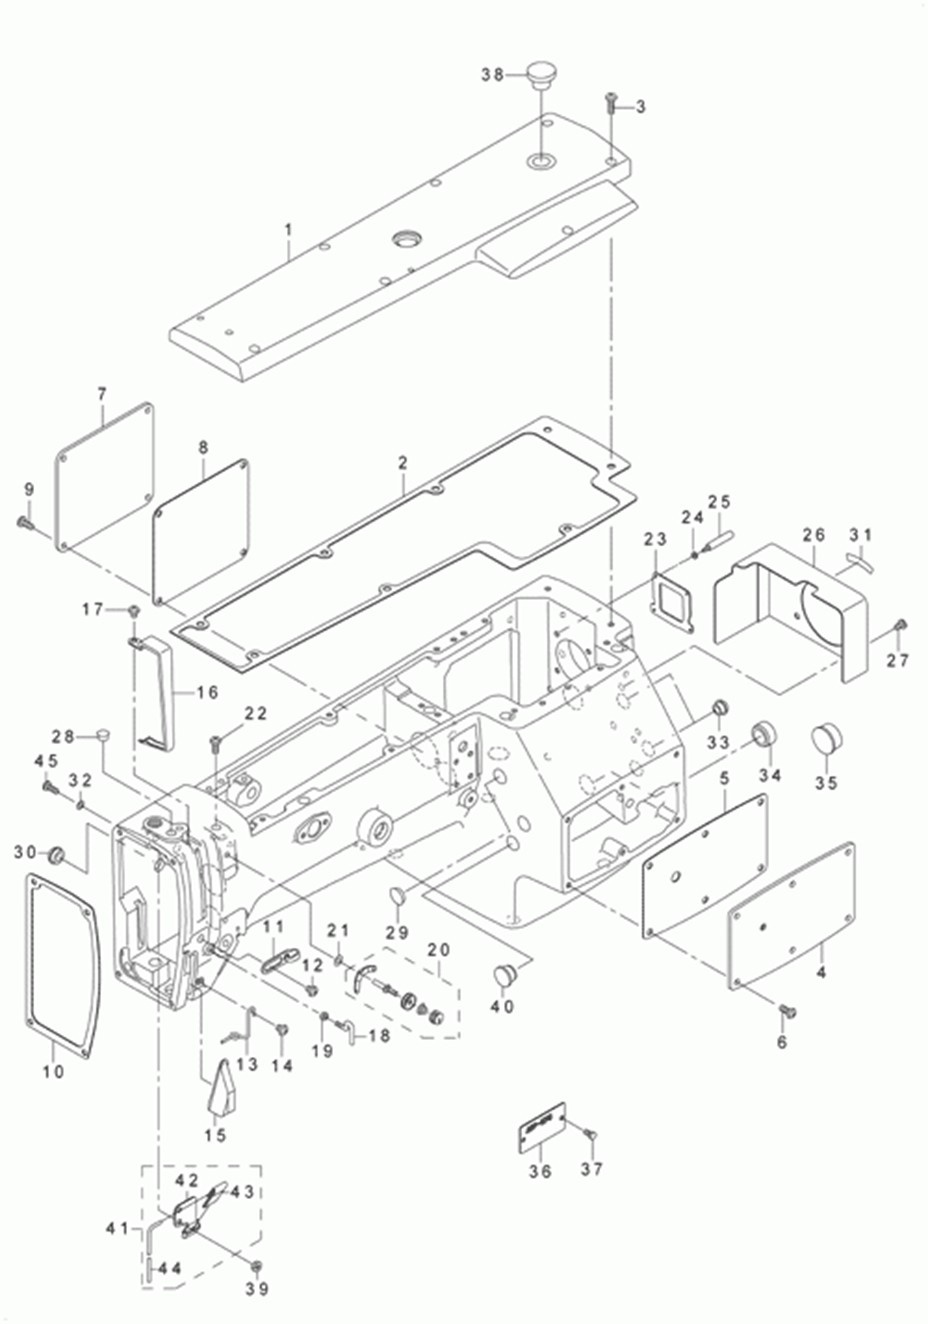 AVP-875S - 1. FRAME & MICELLANEOUS COVER COMPONENTS